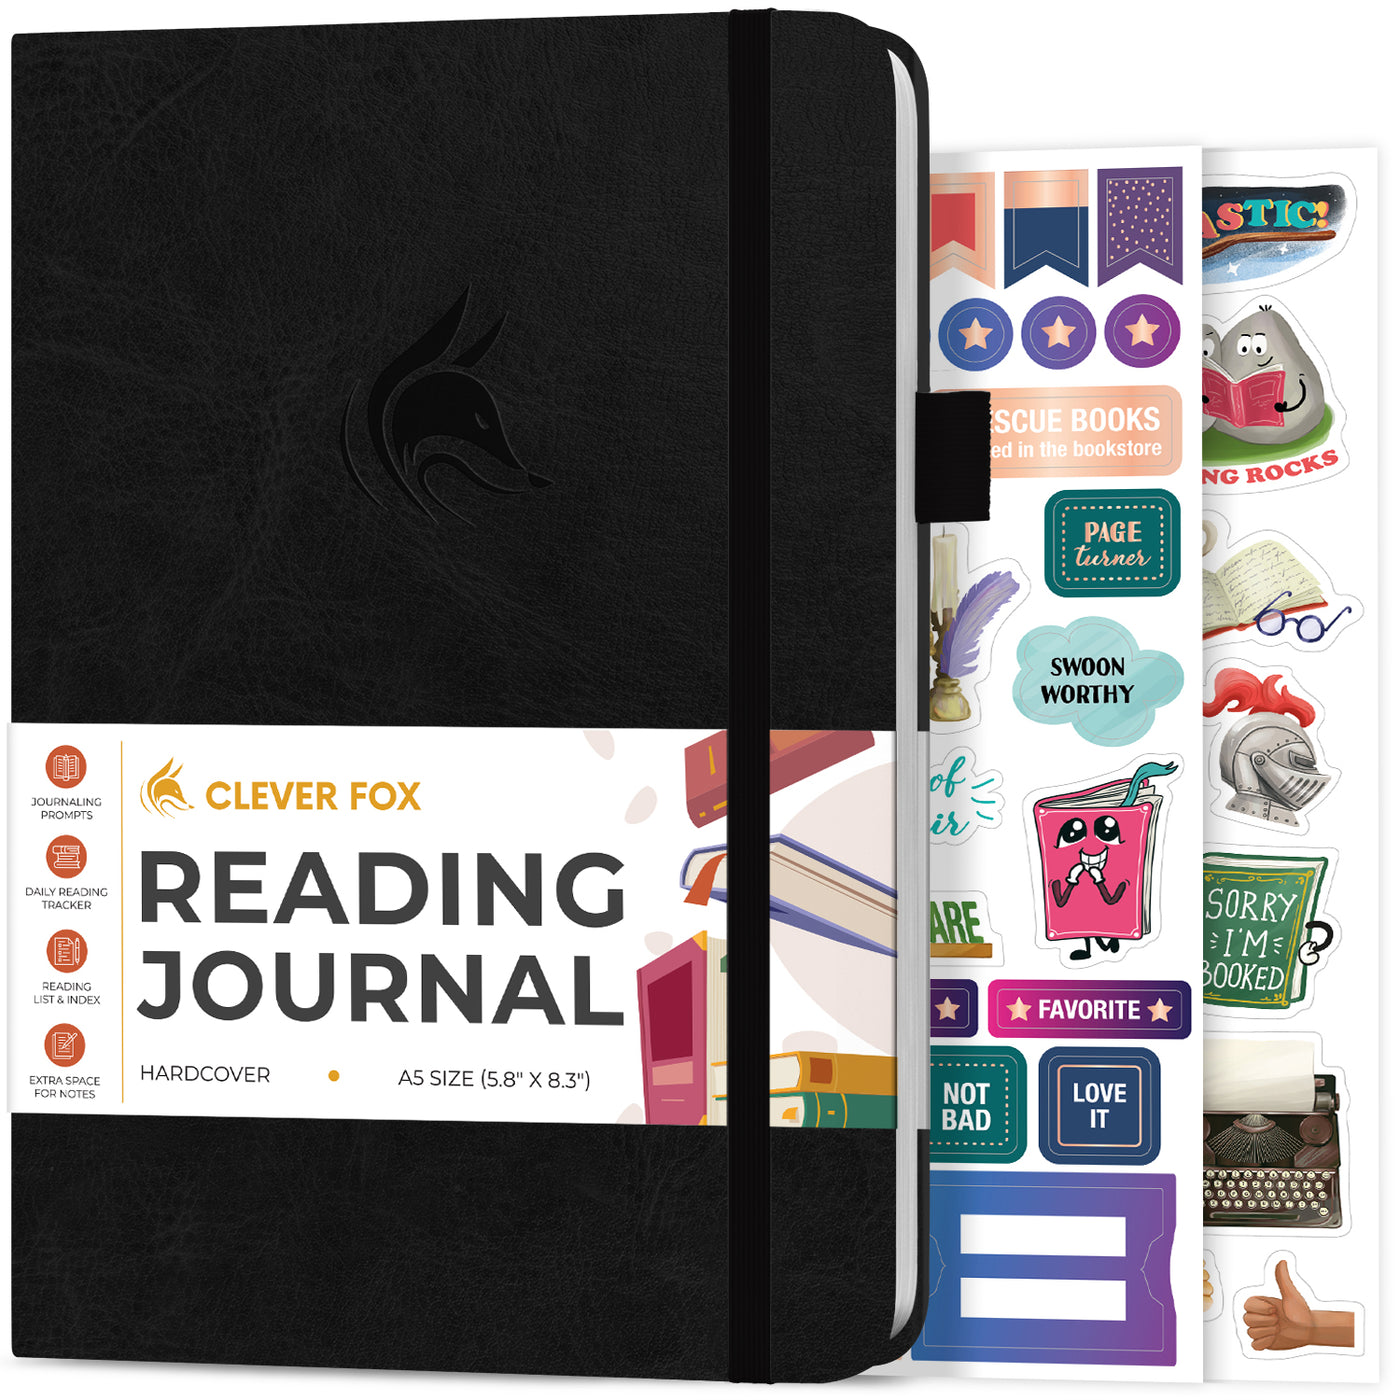 Reading Journal – Clever Fox®